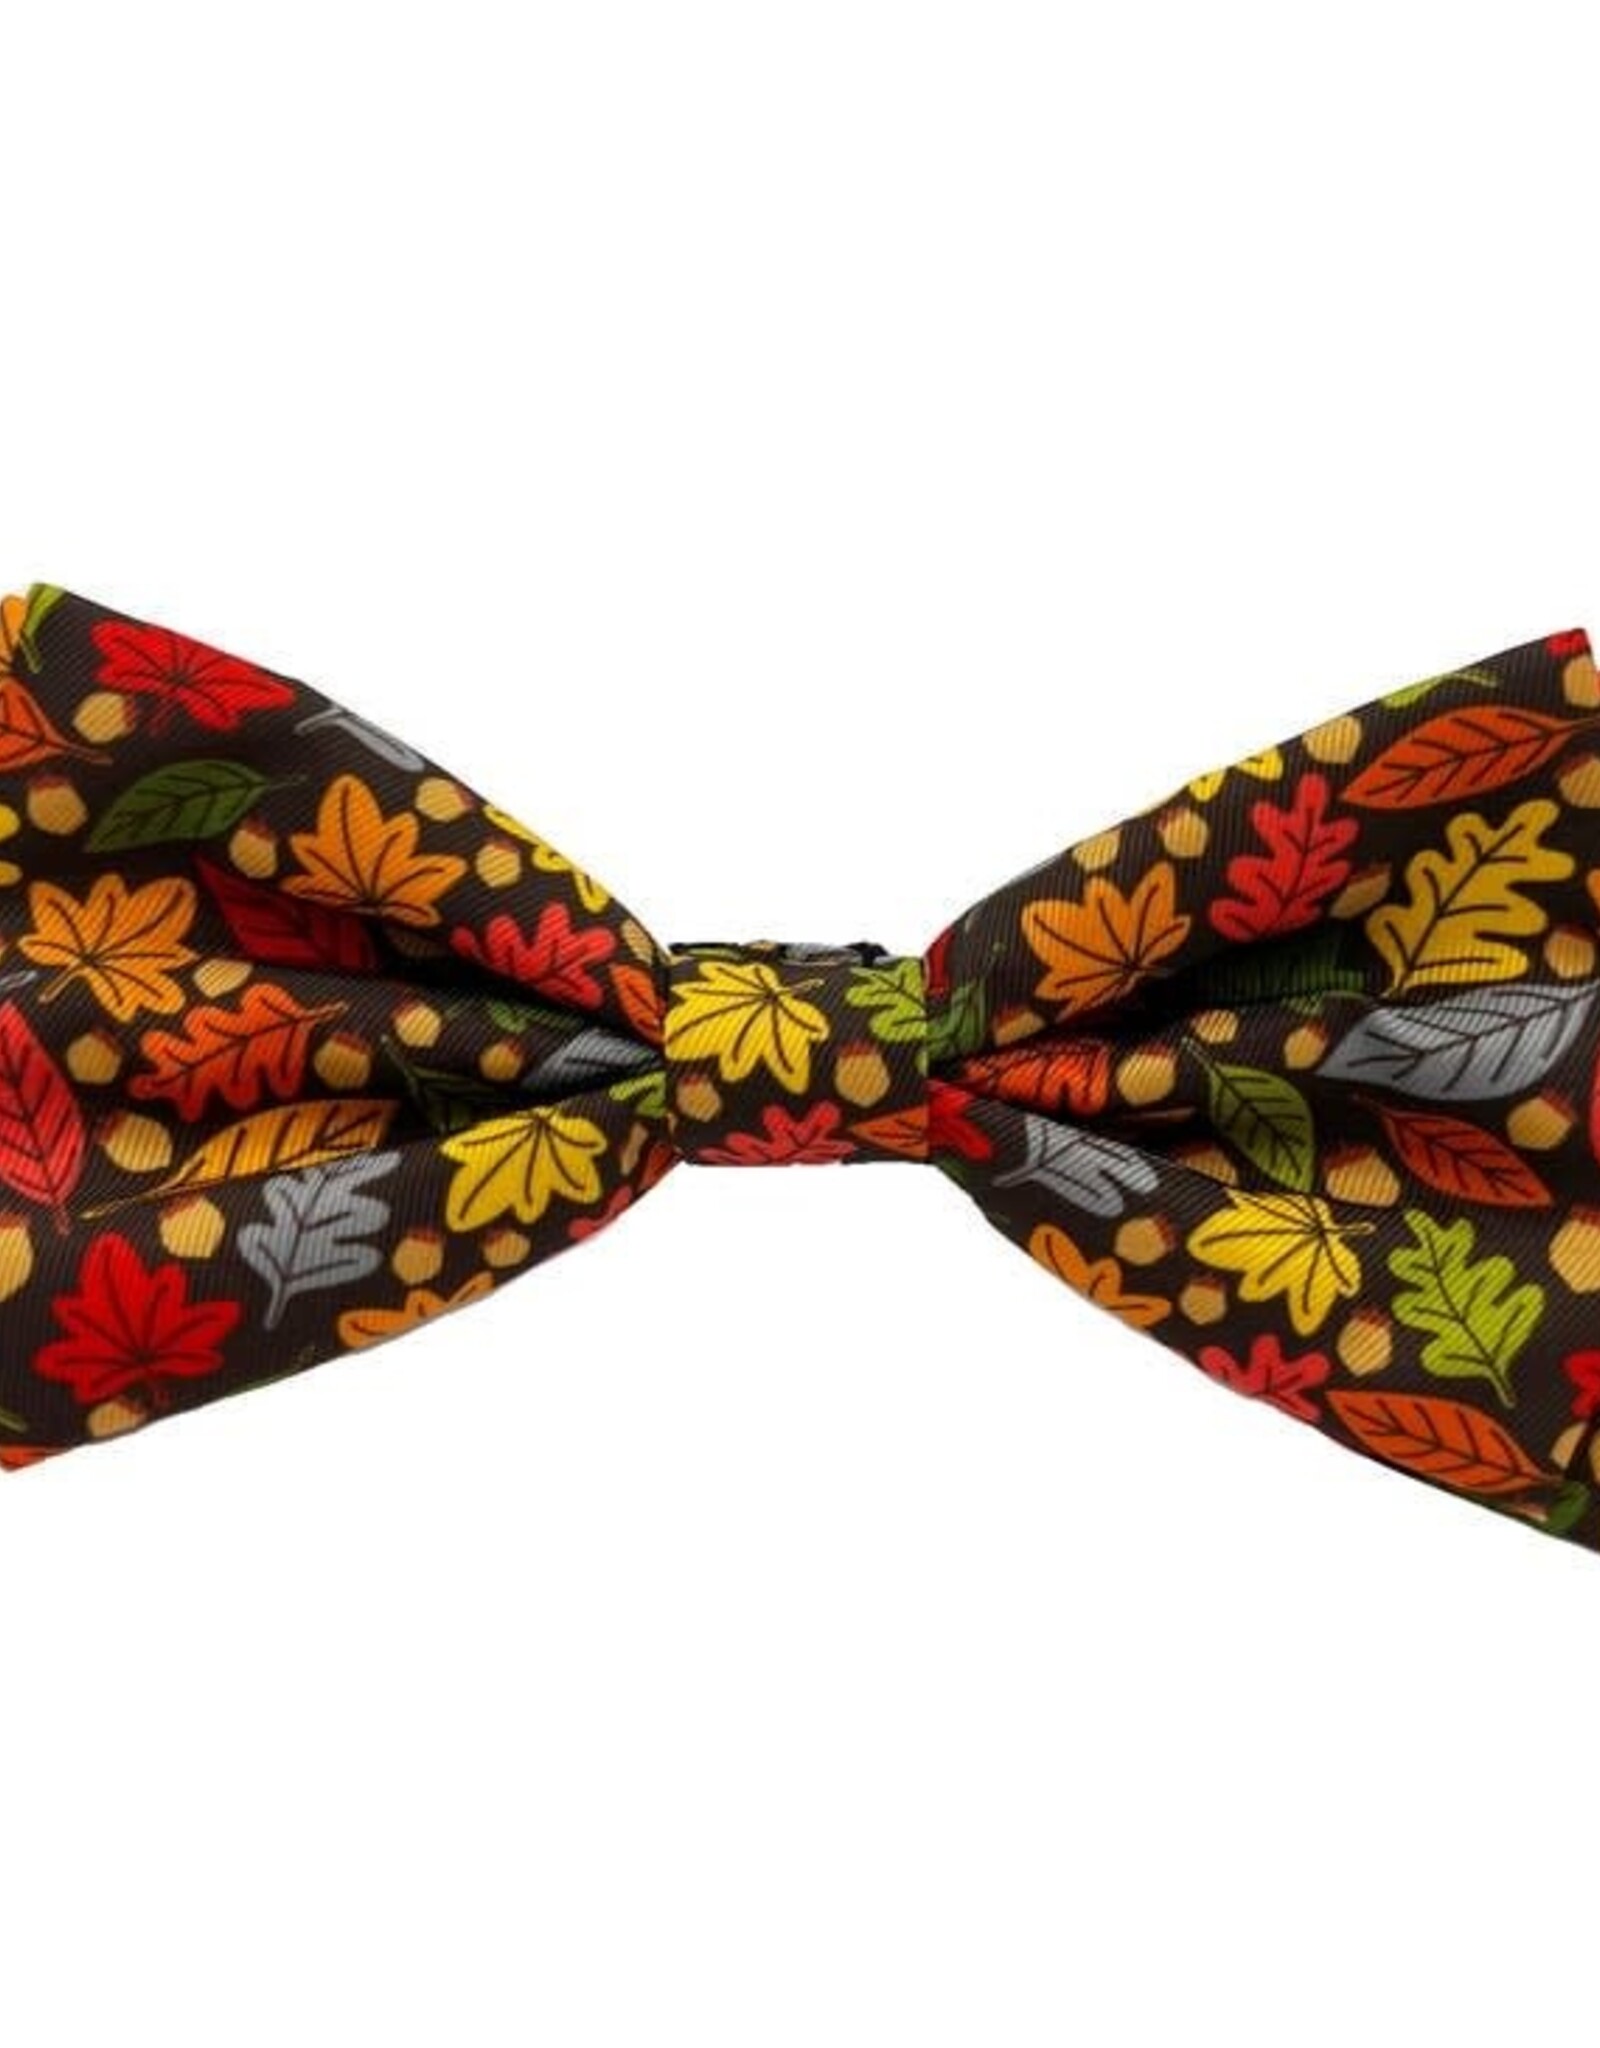 Huxley & Kent Fall Bow Tie - Leaves & Nuts